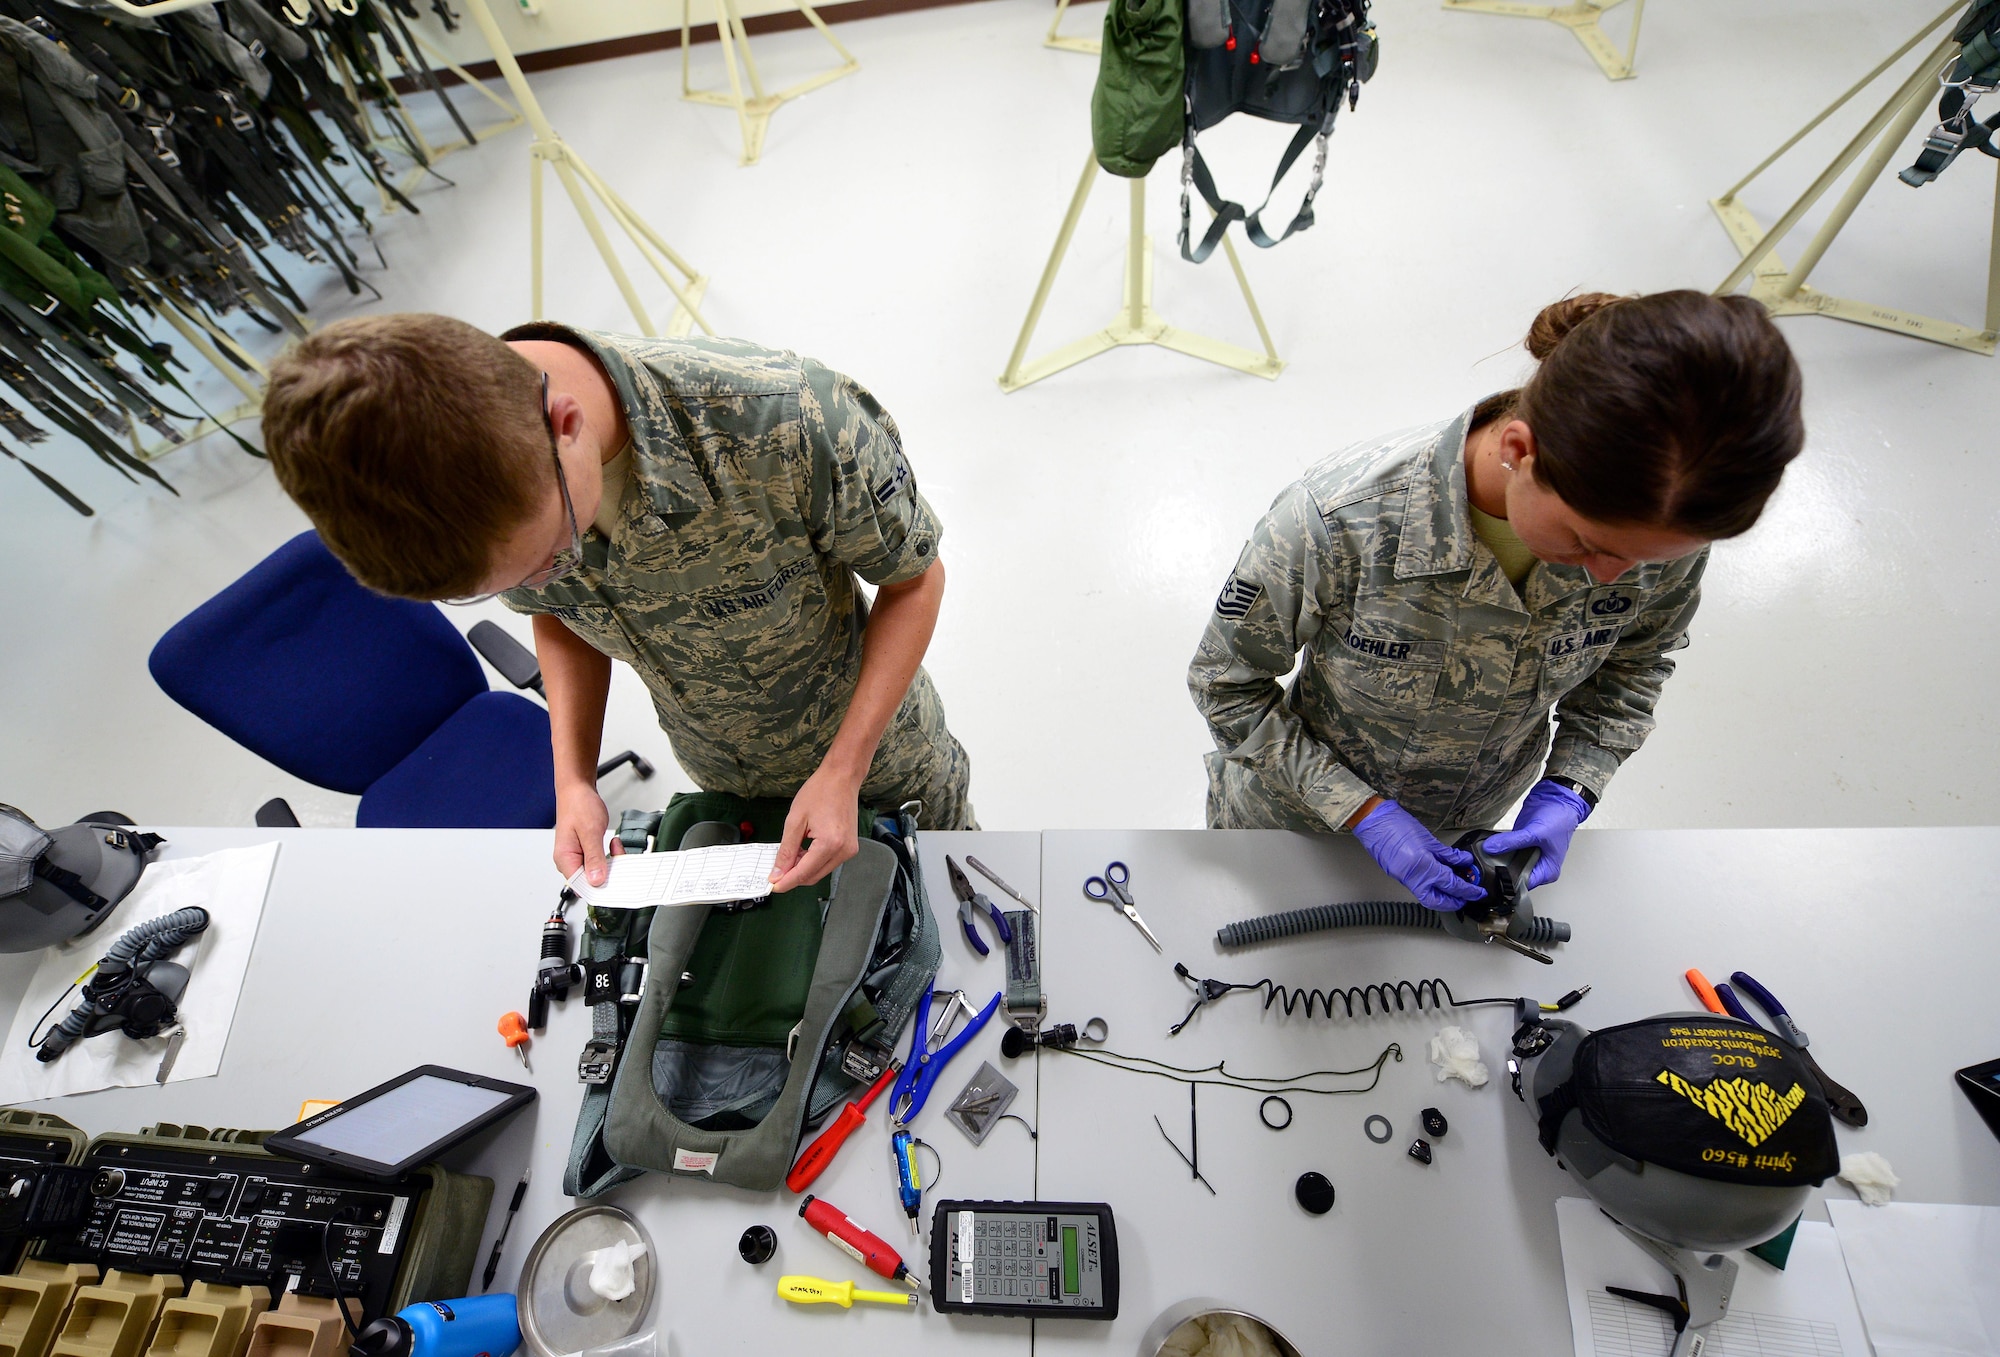 U.S. Air Force Tech. Sgt. Suzanne Koehler, an aircrew flight equipment technician assigned to the 131st Operations Support Flight, and Airman 1st Class Timothy Doyle, an aircrew flight equipment apprentice assigned to the 509th Operations Support Squadron, take apart aircrew equipment to ensure all components are correctly functioning at Andersen Air Force Base, Guam, Jan. 24, 2017. Bomber missions familiarize aircrew with airbases and operations in different Geographic Combatant Commands. (U.S. Air Force photo by Airman 1st Class Jazmin Smith)